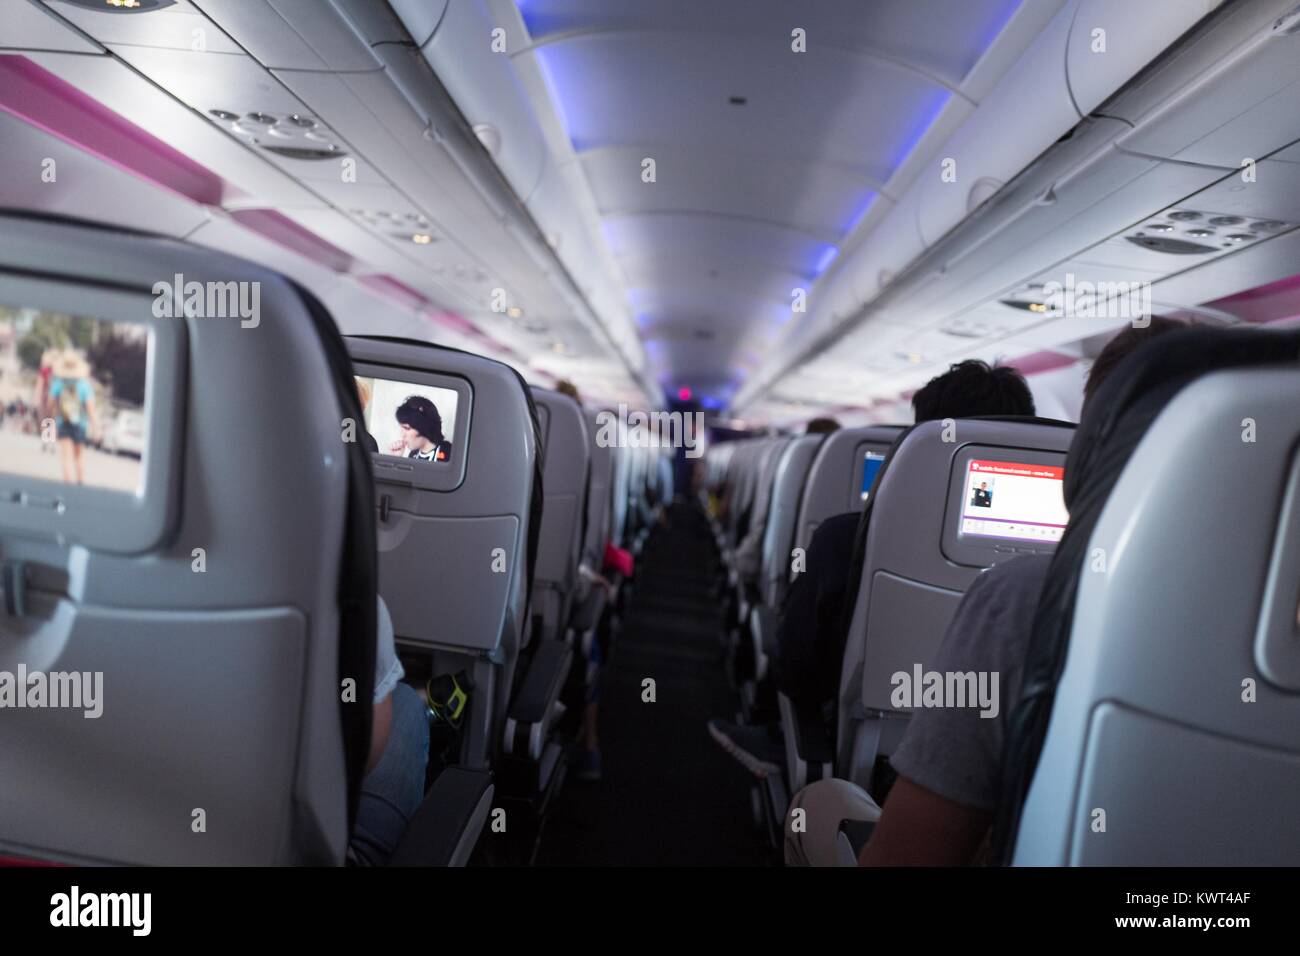 View down the aisle of the coach class section of a Virgin America aircraft in flight, with in-flight entertainment consoles on seat backs visible, September 13, 2017. Stock Photo